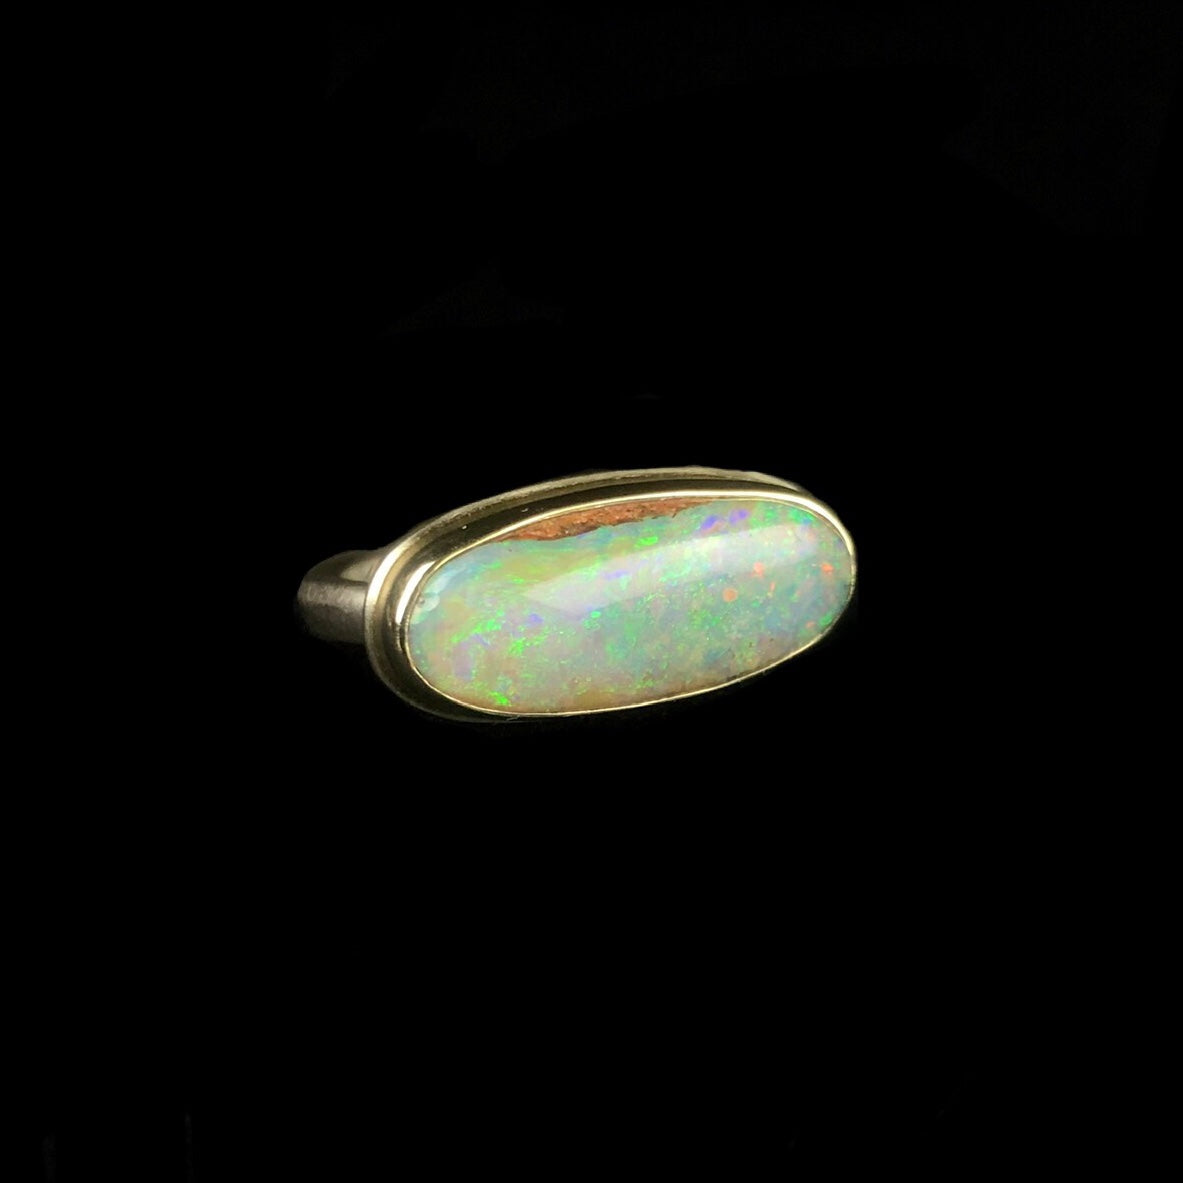 Iridescent green, violet purple and pink confetti of color in opal stone ring 